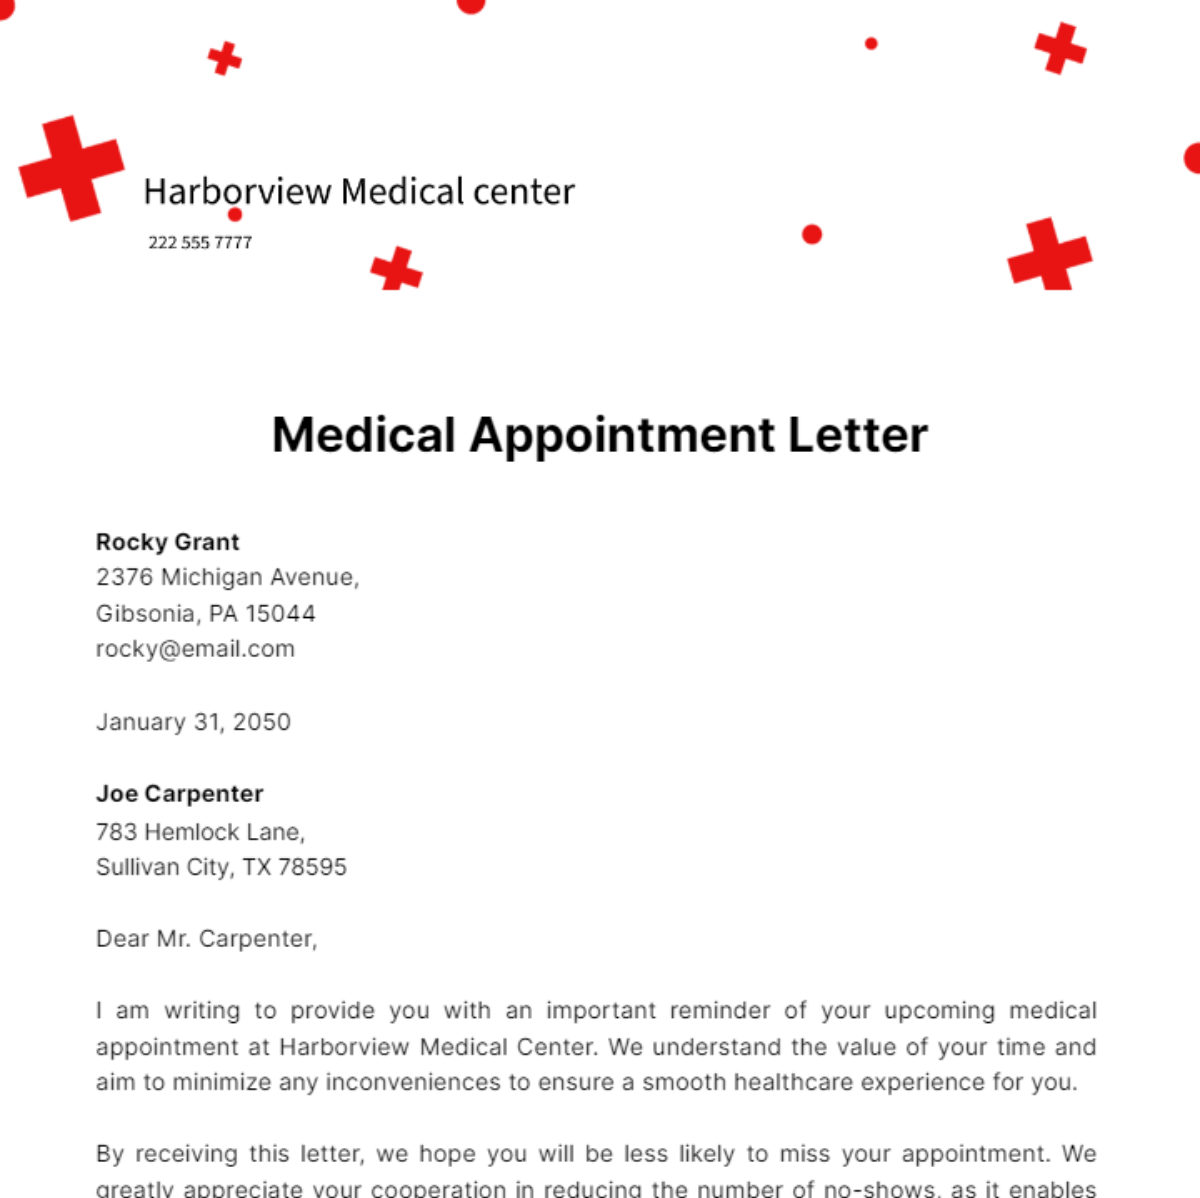 Medical Appointment Letter Template